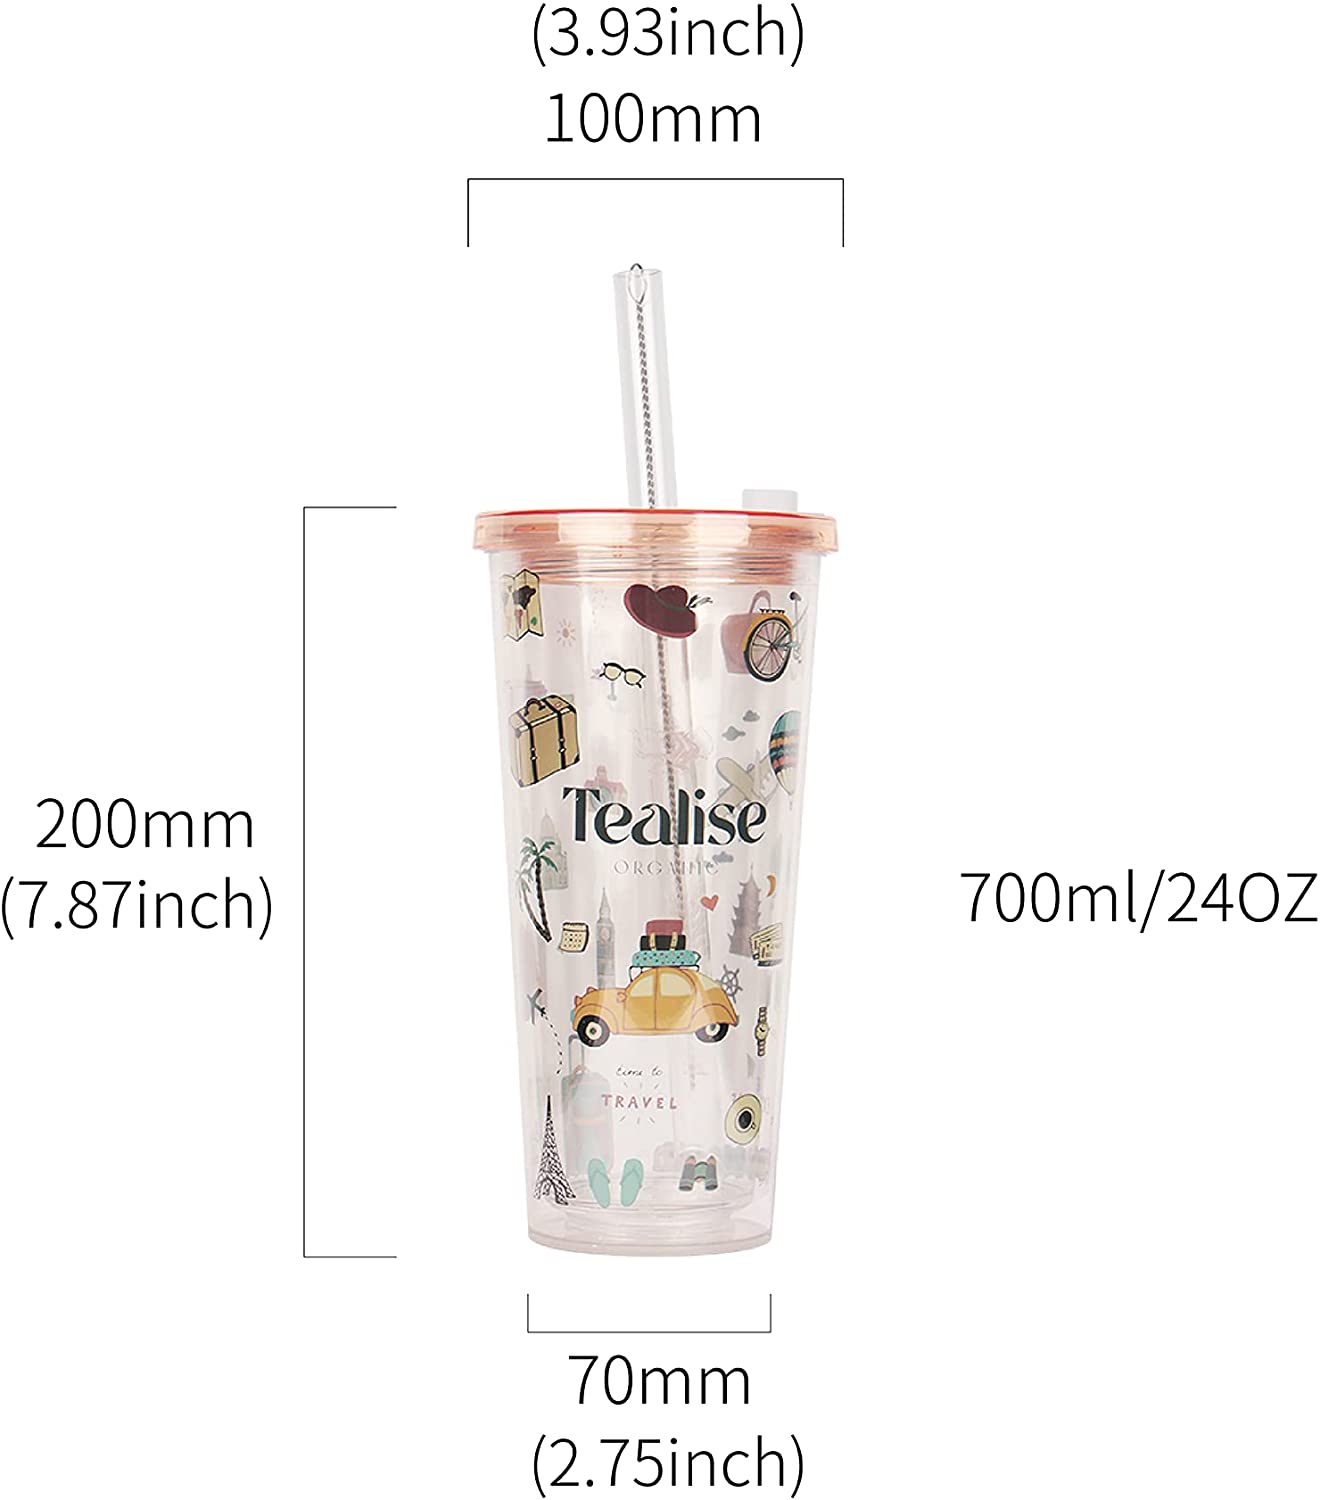 Reusable Boba Cup with Resealable Lid Plug - 17 Oz Double Wall Insulated |  Smoothie Tumbler | Wide S…See more Reusable Boba Cup with Resealable Lid